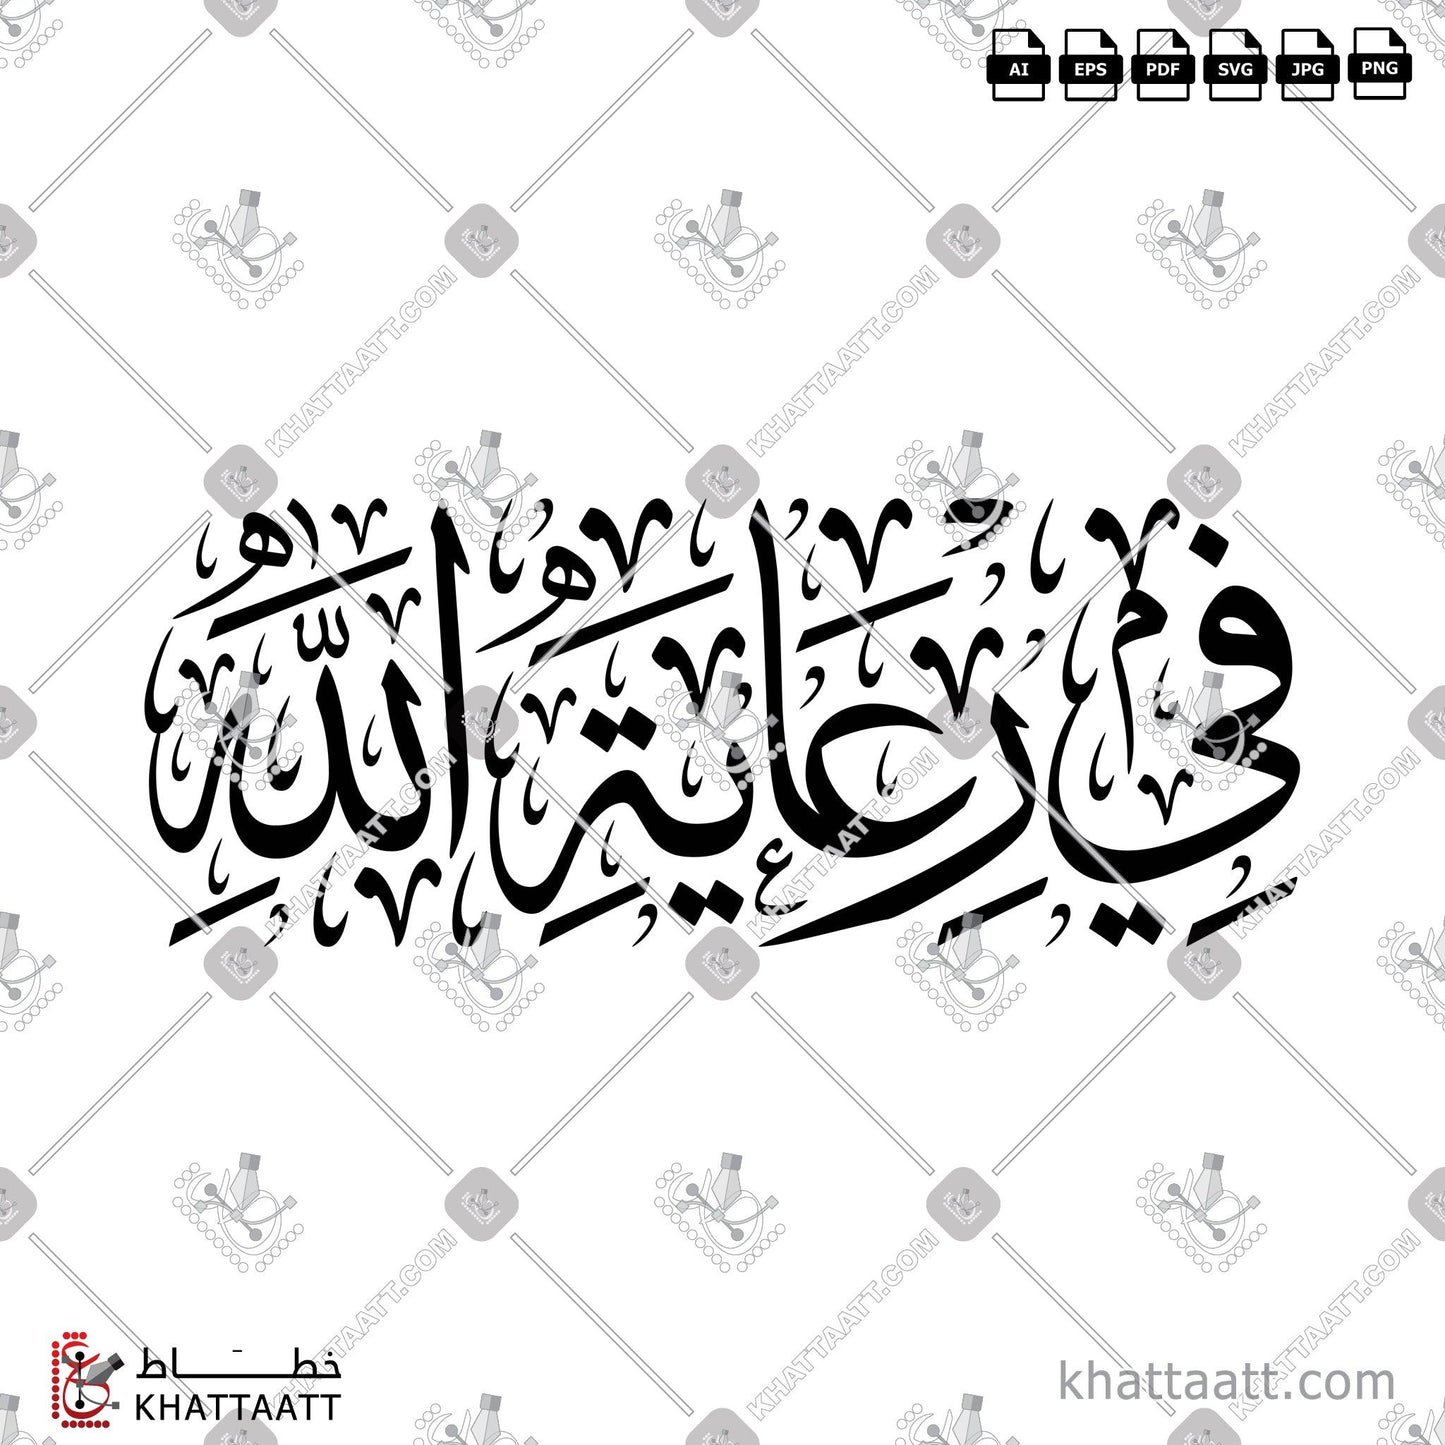 Download Arabic Calligraphy of في رعاية الله in Thuluth - خط الثلث in vector and .png